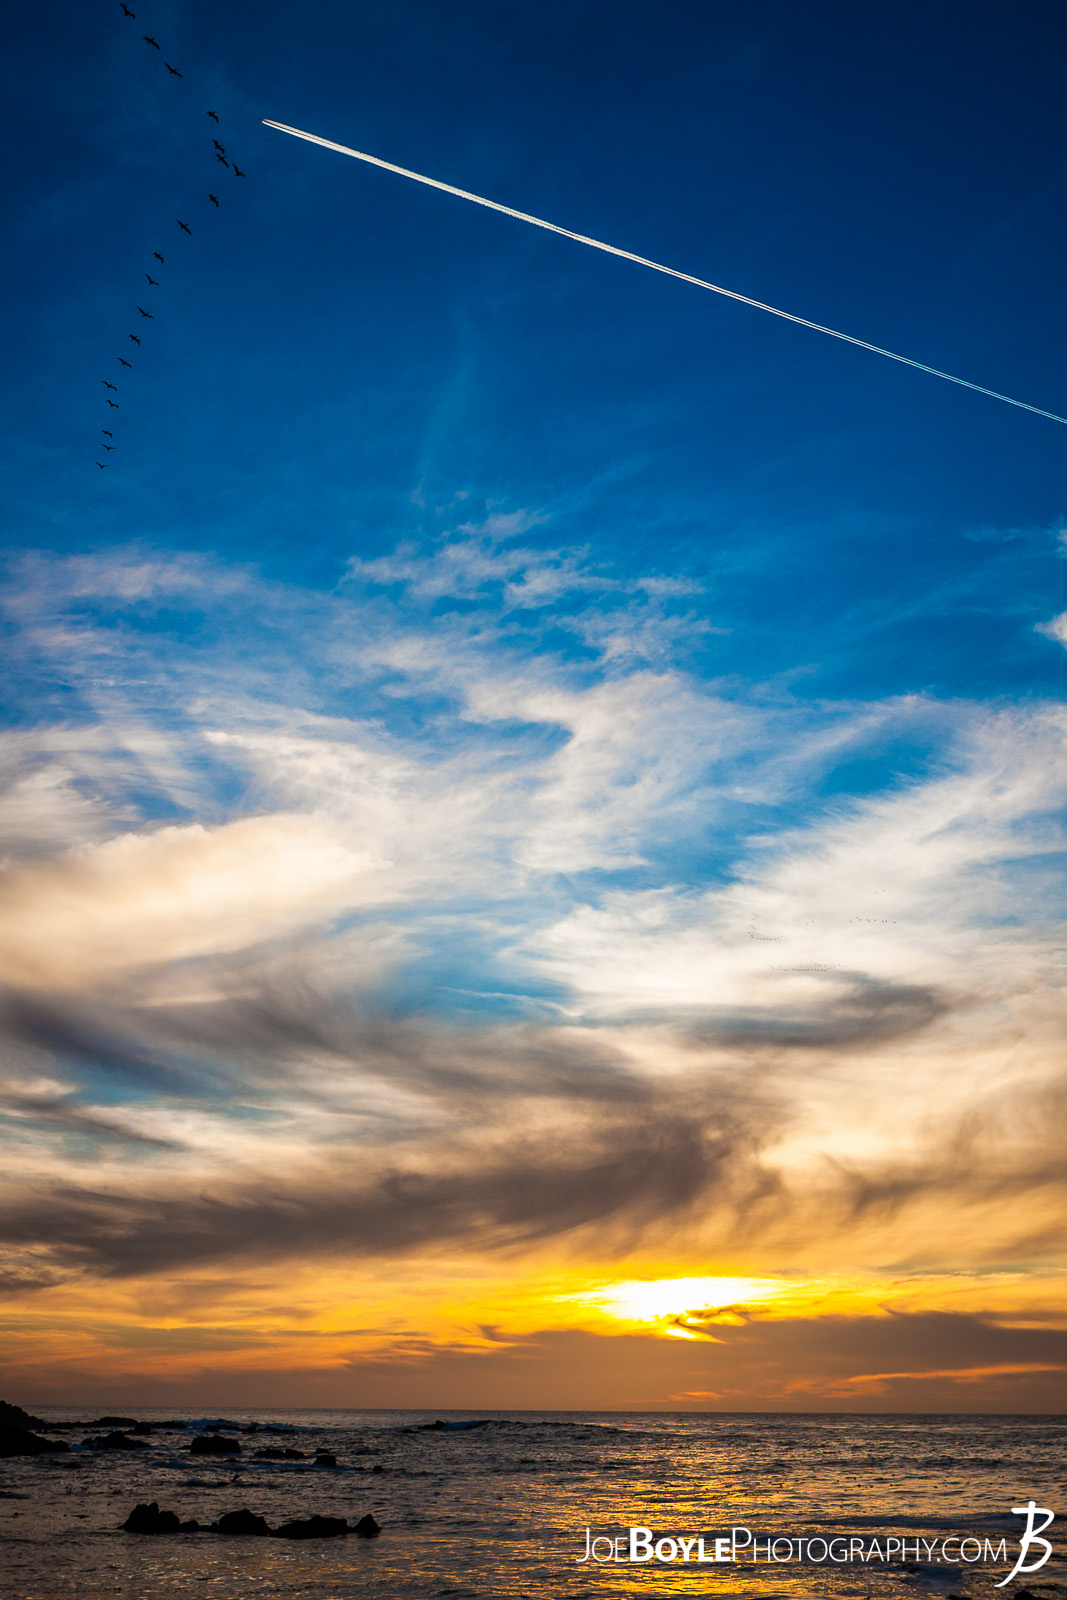  When I was traveling to Monterey, California I spent a lot of time just walking around the city, Pacific Grove and the sand dunes in the area. Here is a shot of a beautiful, golden sunset in Pacific Grove! I was lucky enough to capture a plane flying overhead and a flock of birds at the same time in this shot! 